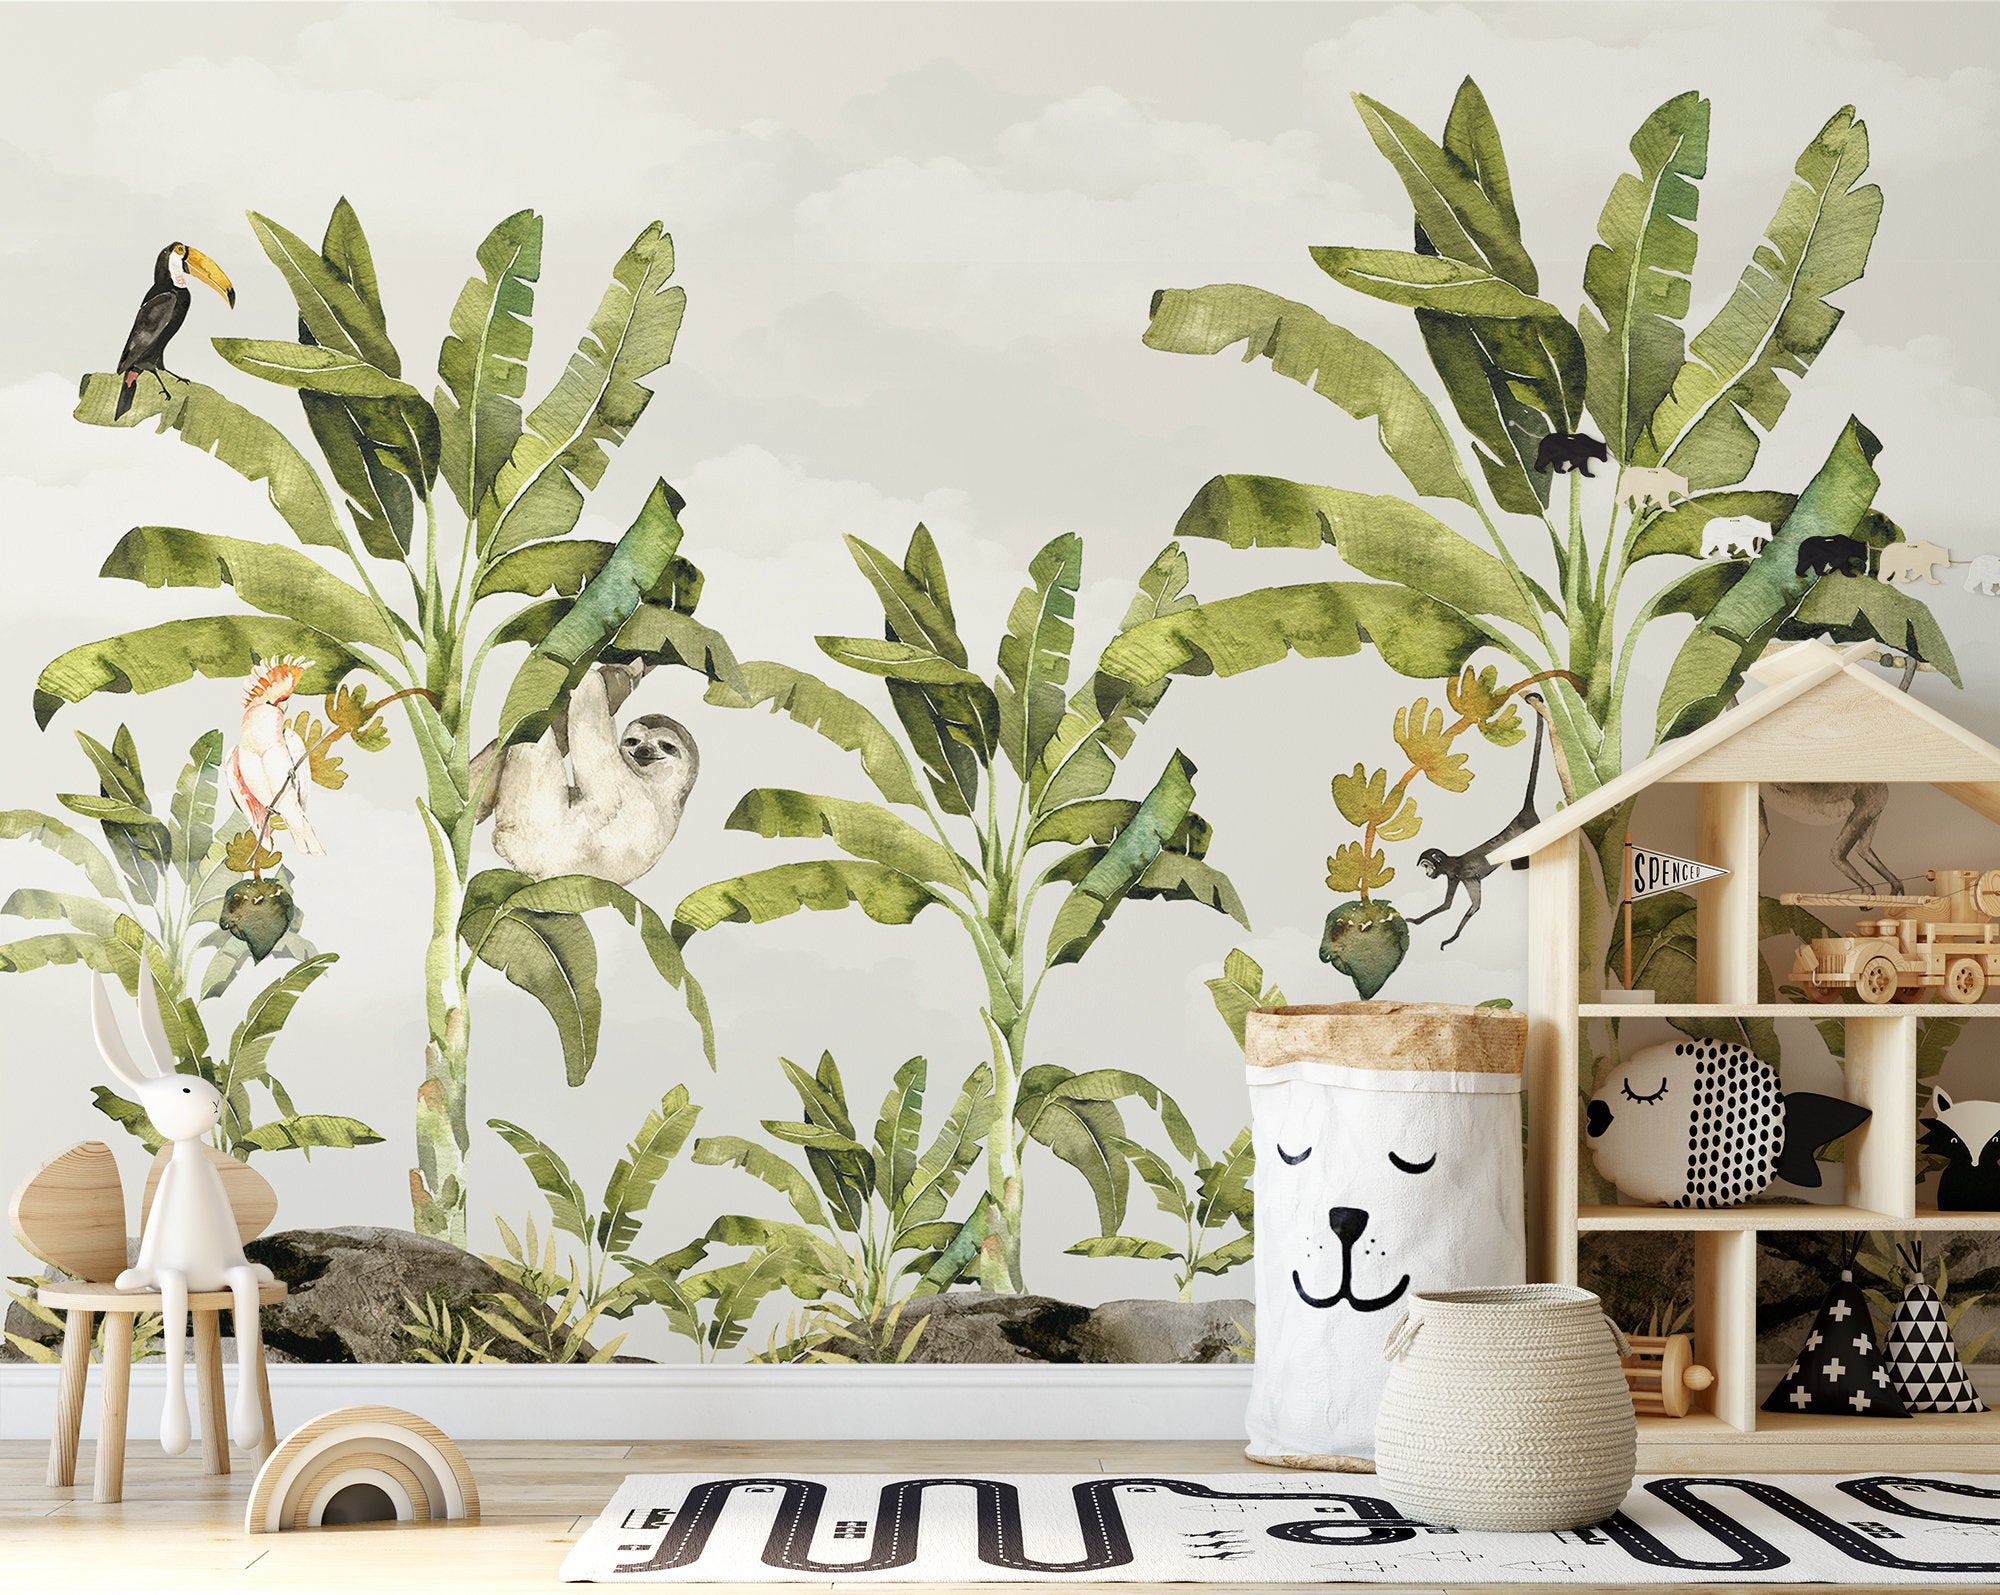 Baby Monkeys Playing on the Leaves Wallpaper Self Adhesive Peel & Stick Wall Sticker Wall Decoration Scandinavian Removable